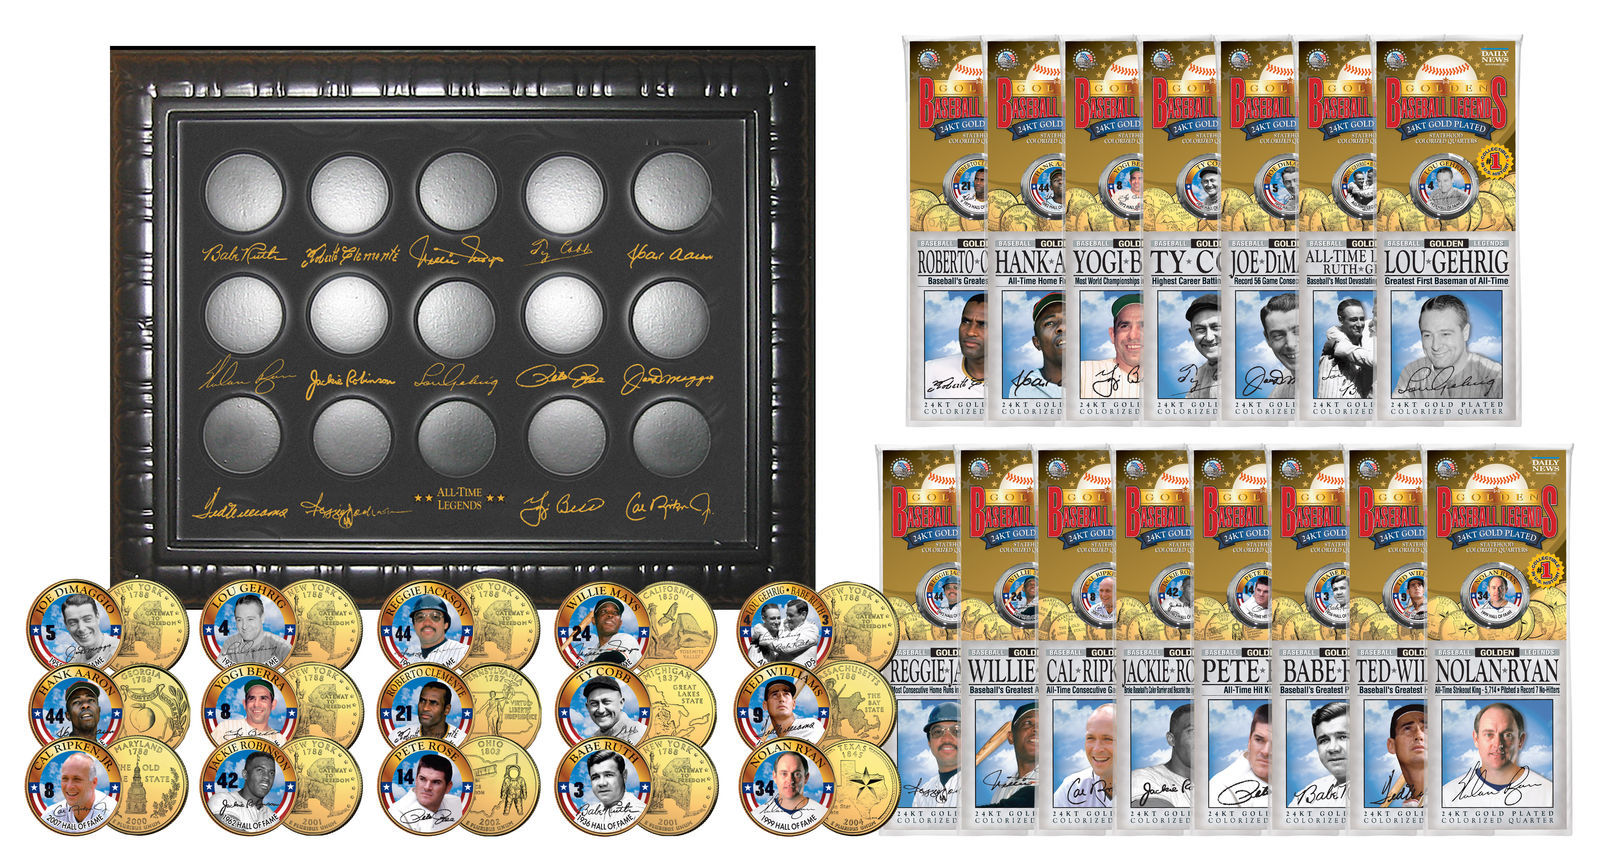 Primary image for BASEBALL LEGENDS 15-Coin Set 24K Gold Plated State Quarters w/Display SUPER SALE